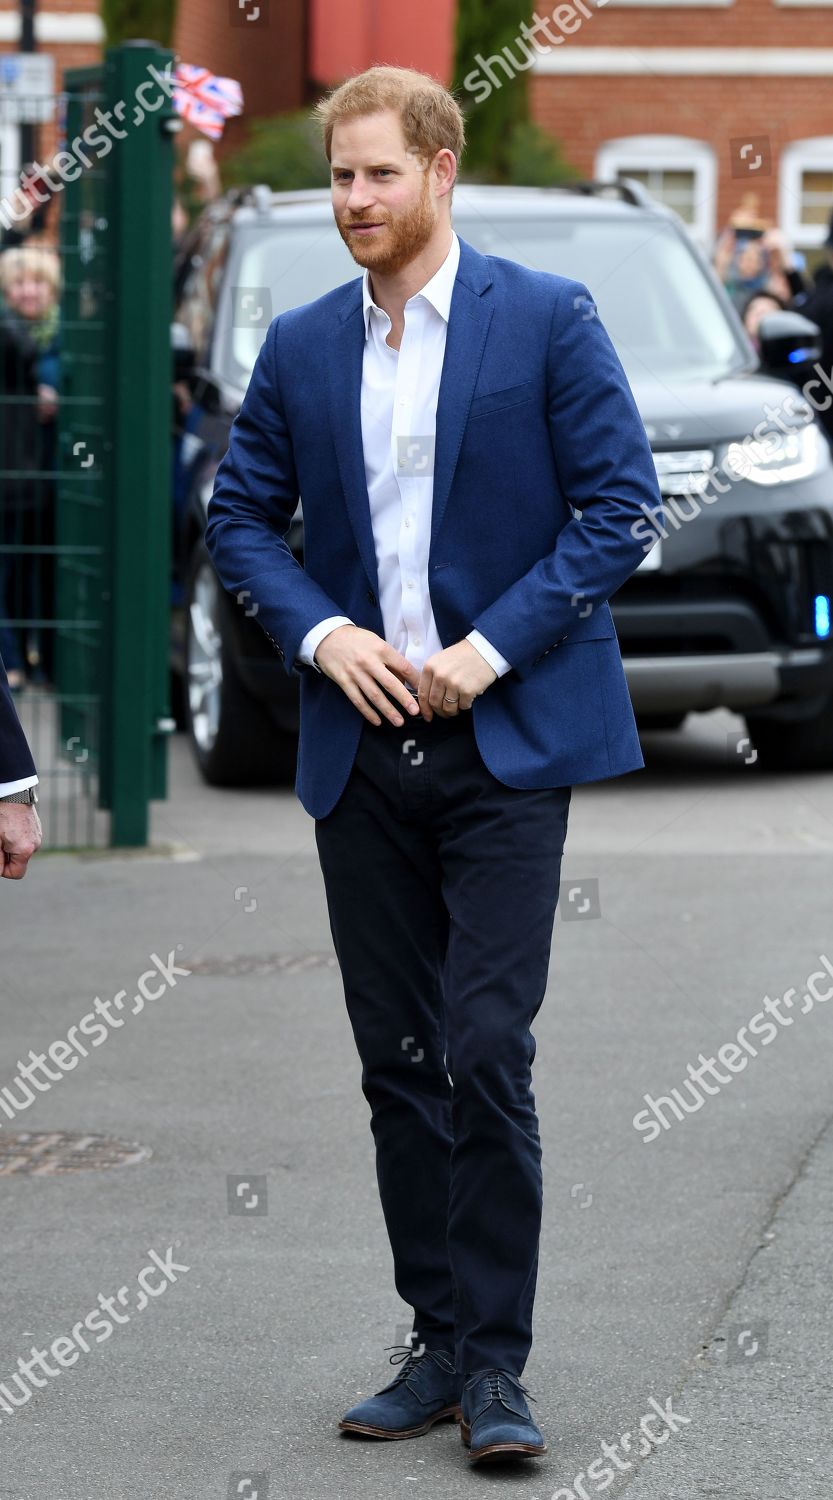 prince-harry-visits-st-vincents-catholic-primary-school-for-commonwealth-canopy-and-woodland-trust-tree-planting-ceremony-london-uk-shutterstock-editorial-10160984e.jpg